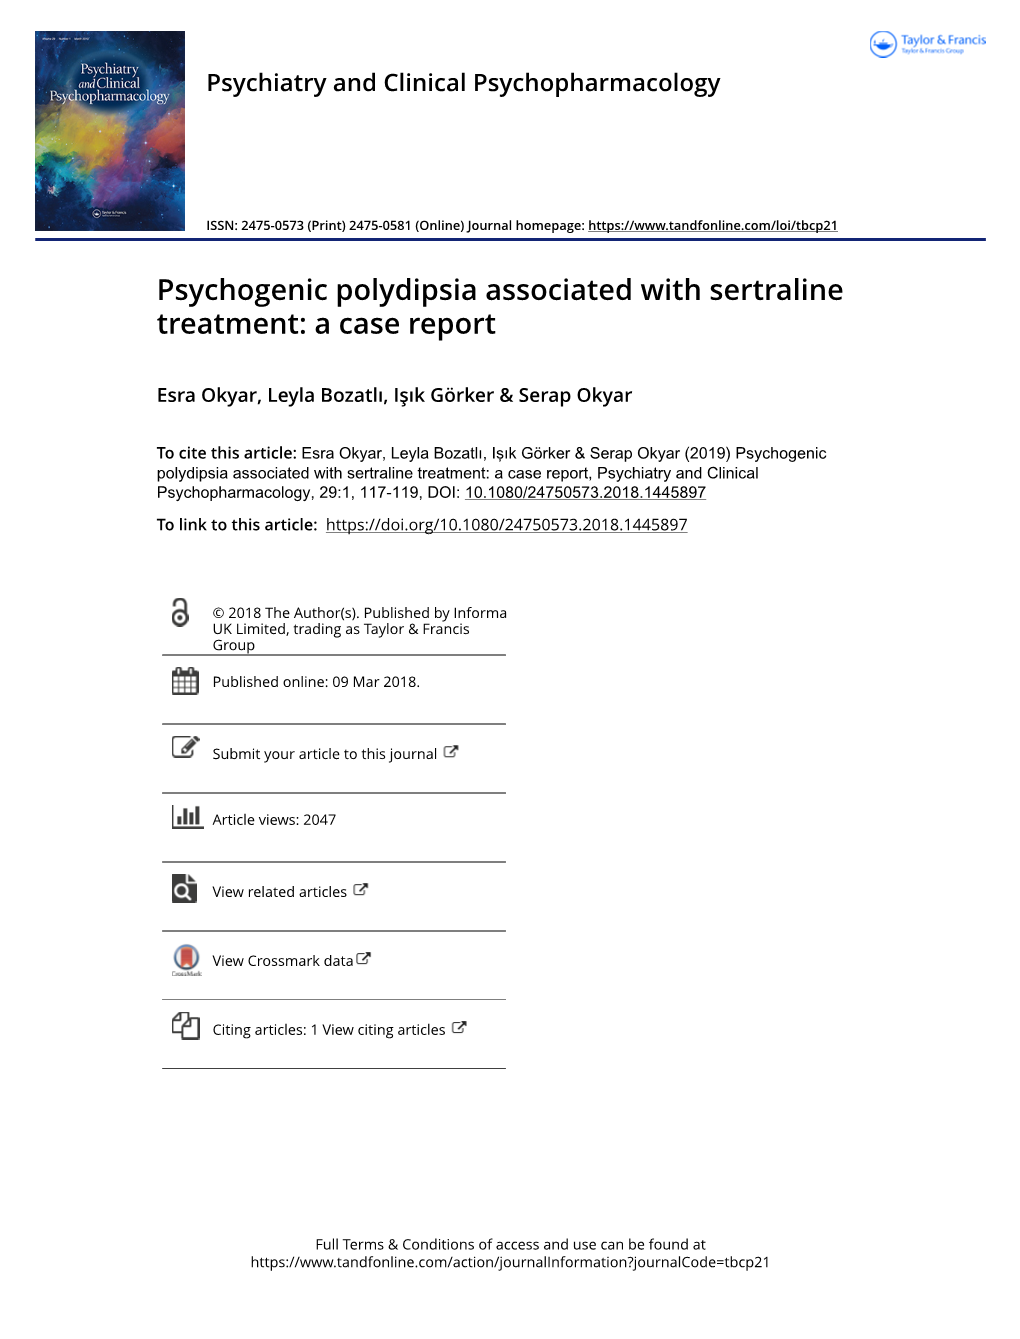 Psychogenic Polydipsia Associated with Sertraline Treatment: a Case Report